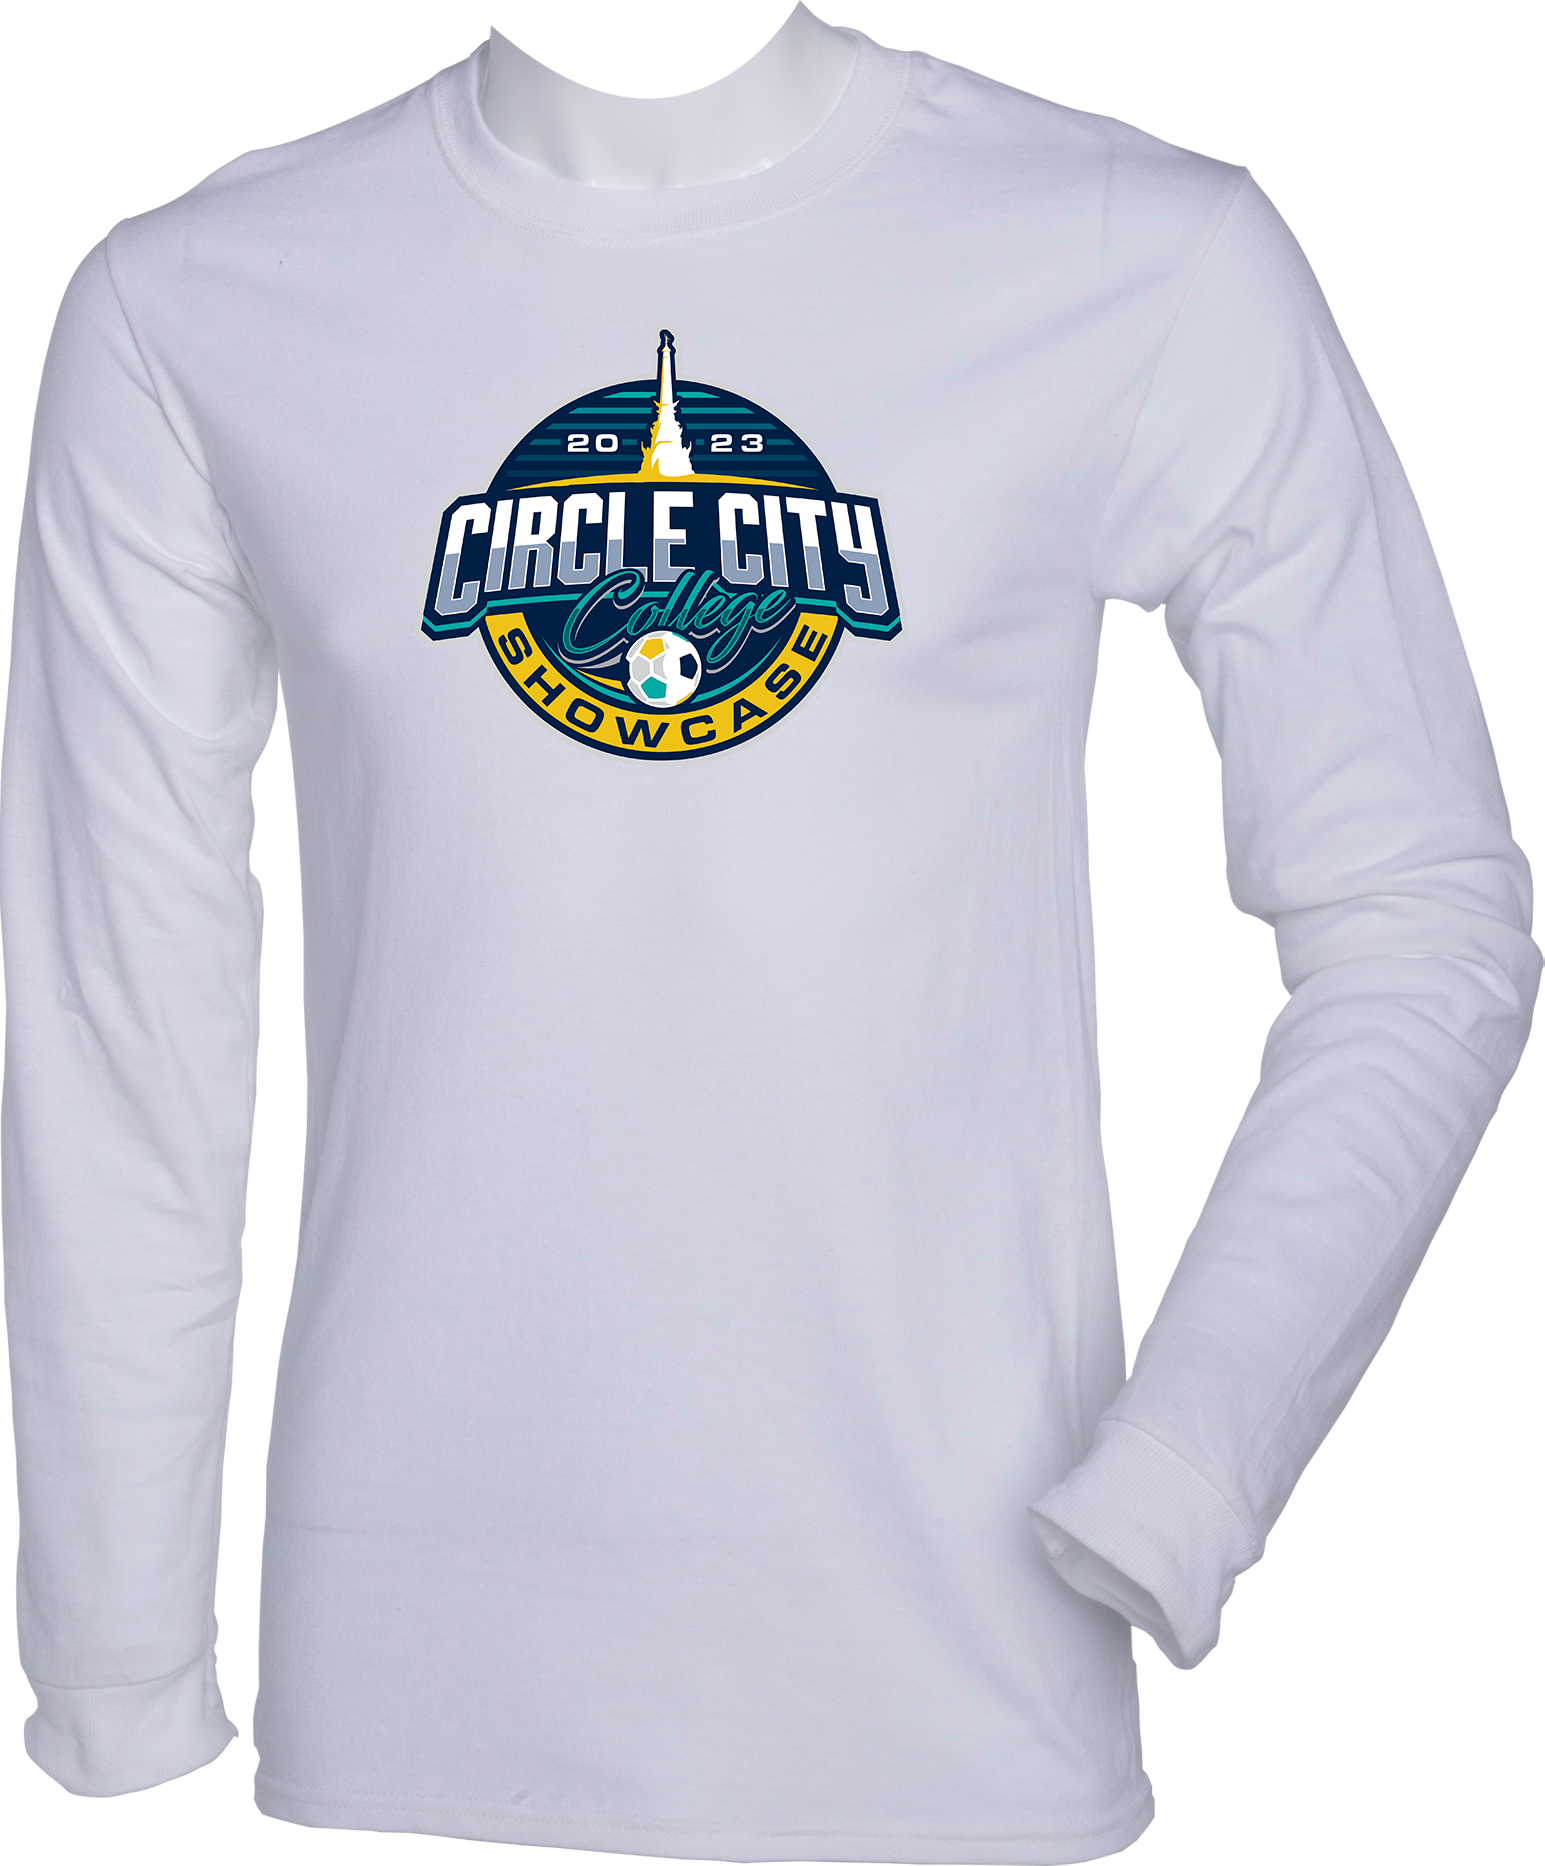 LONG SLEEVES - 2023 Circle City College Showcase